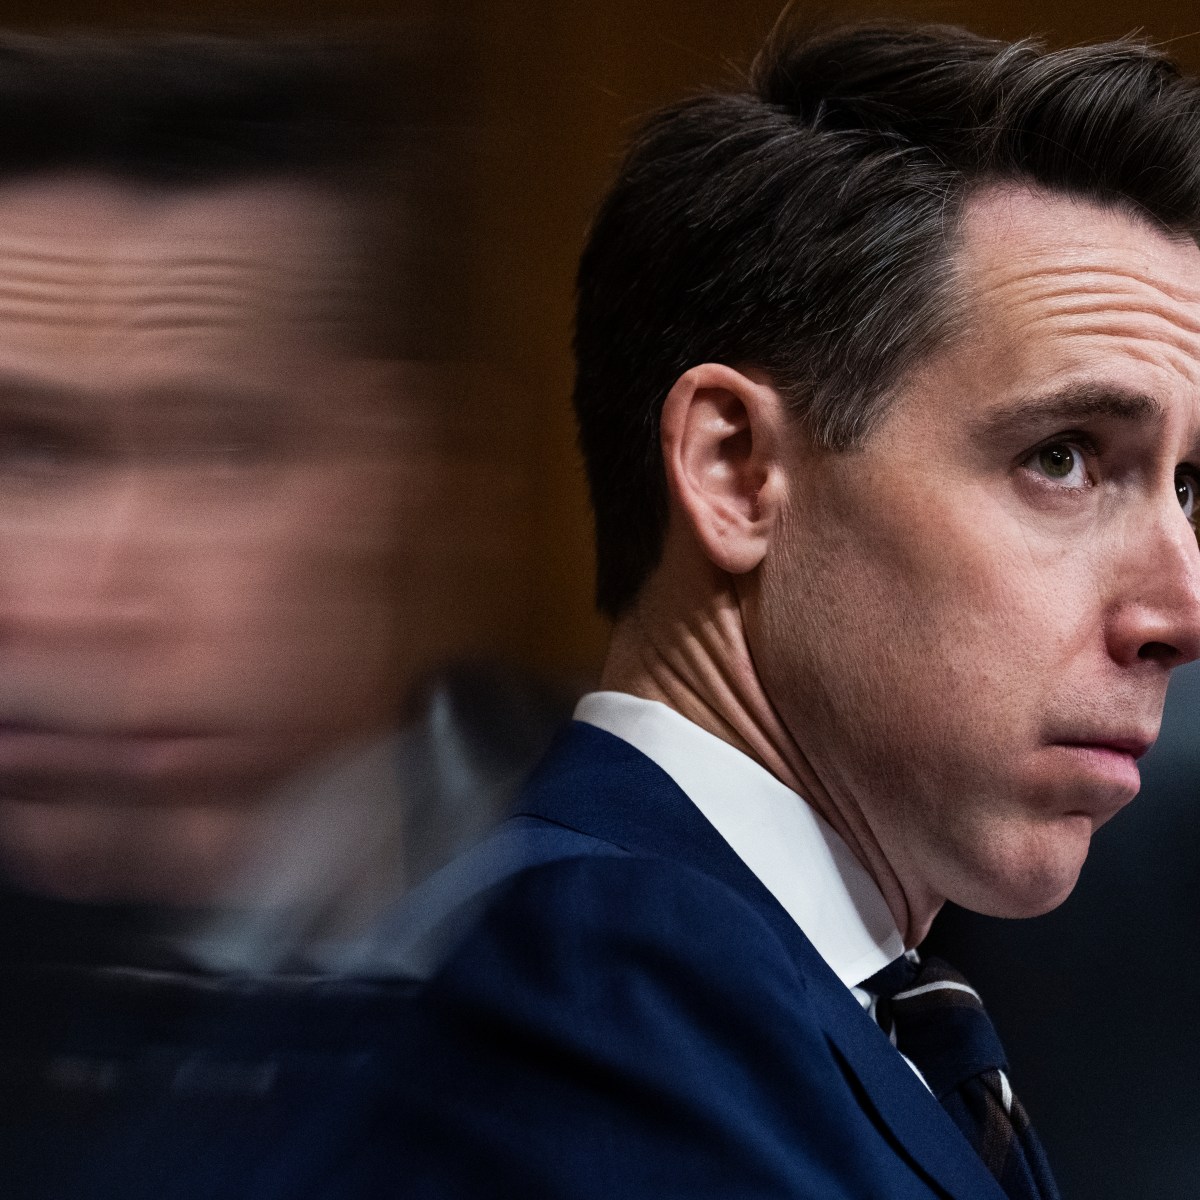 What Josh Hawley and the Right Get Wrong About Manhood